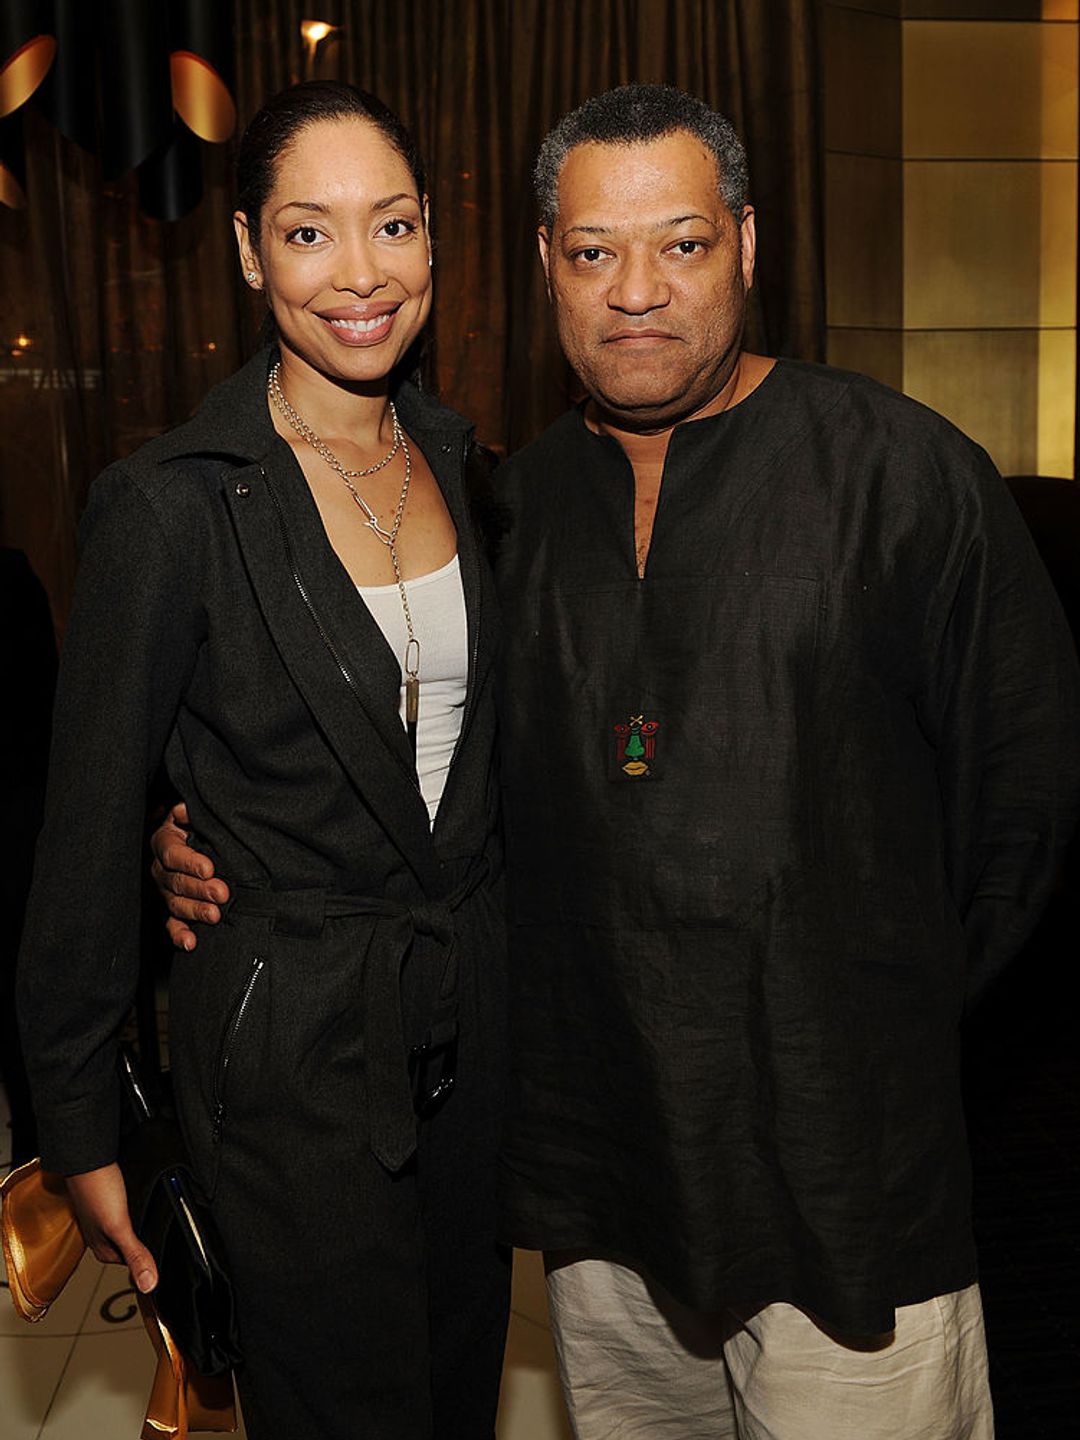 Gina Torres and Laurence Fishburne attend the reception for the world premiere of Cirque du Soleil's "Viva ELVIS" at Aria in CityCenter on February 19, 2010